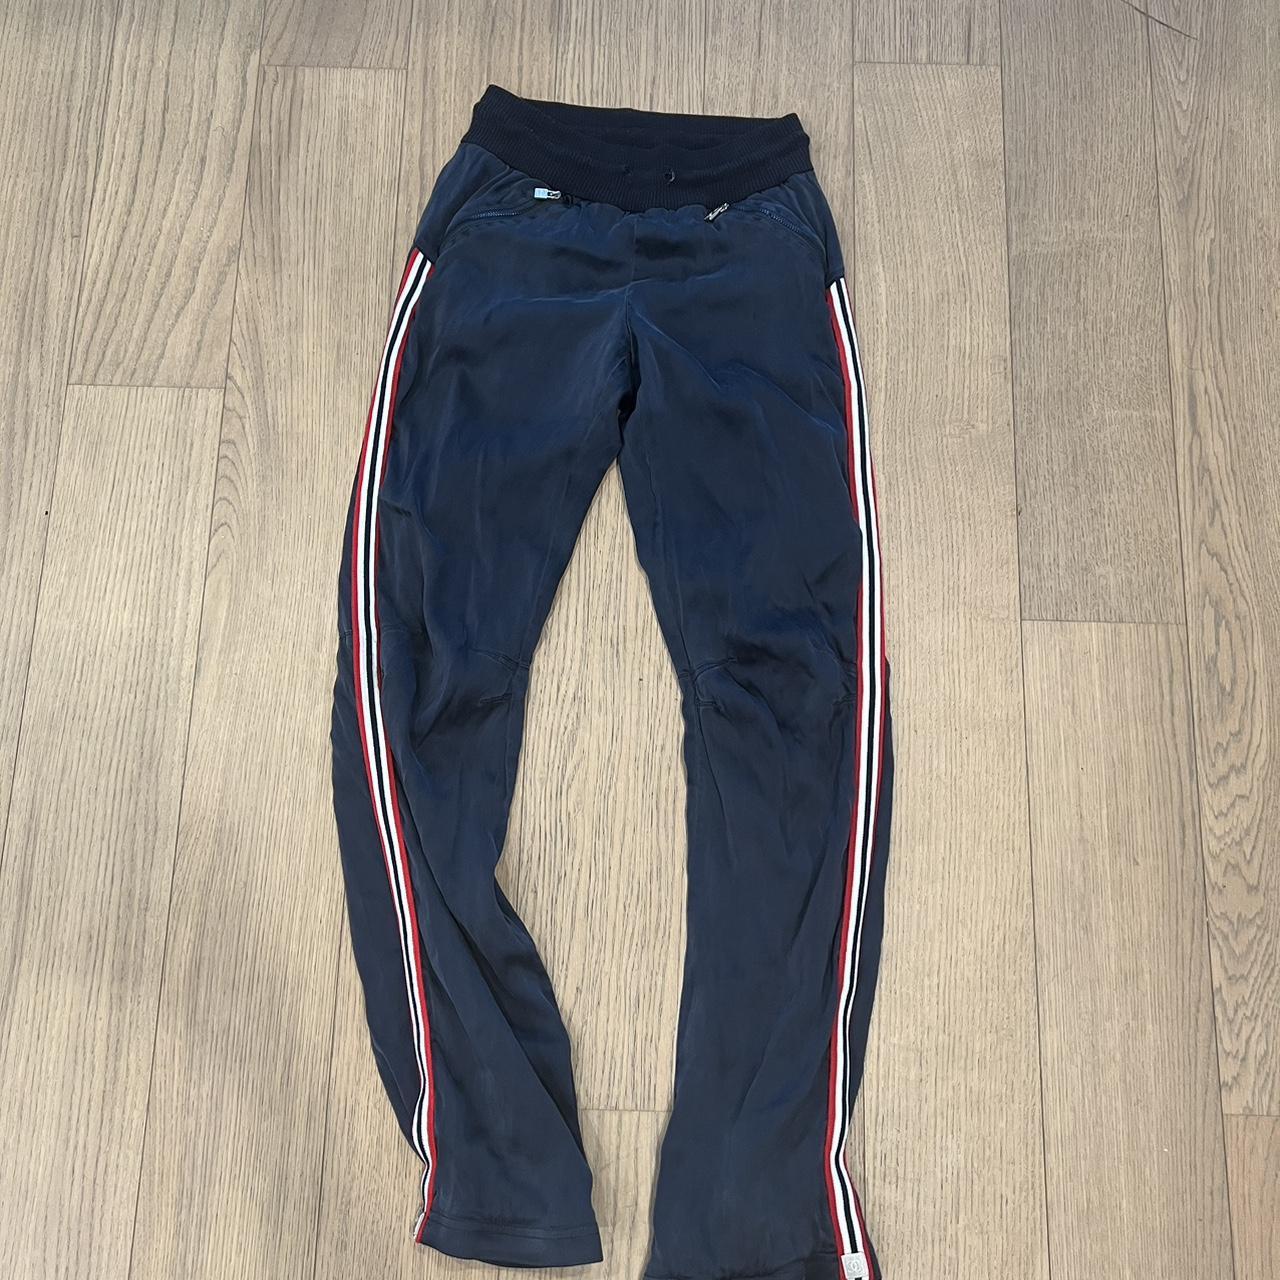 Vintage Chanel joggers- I'm depressed these don't - Depop